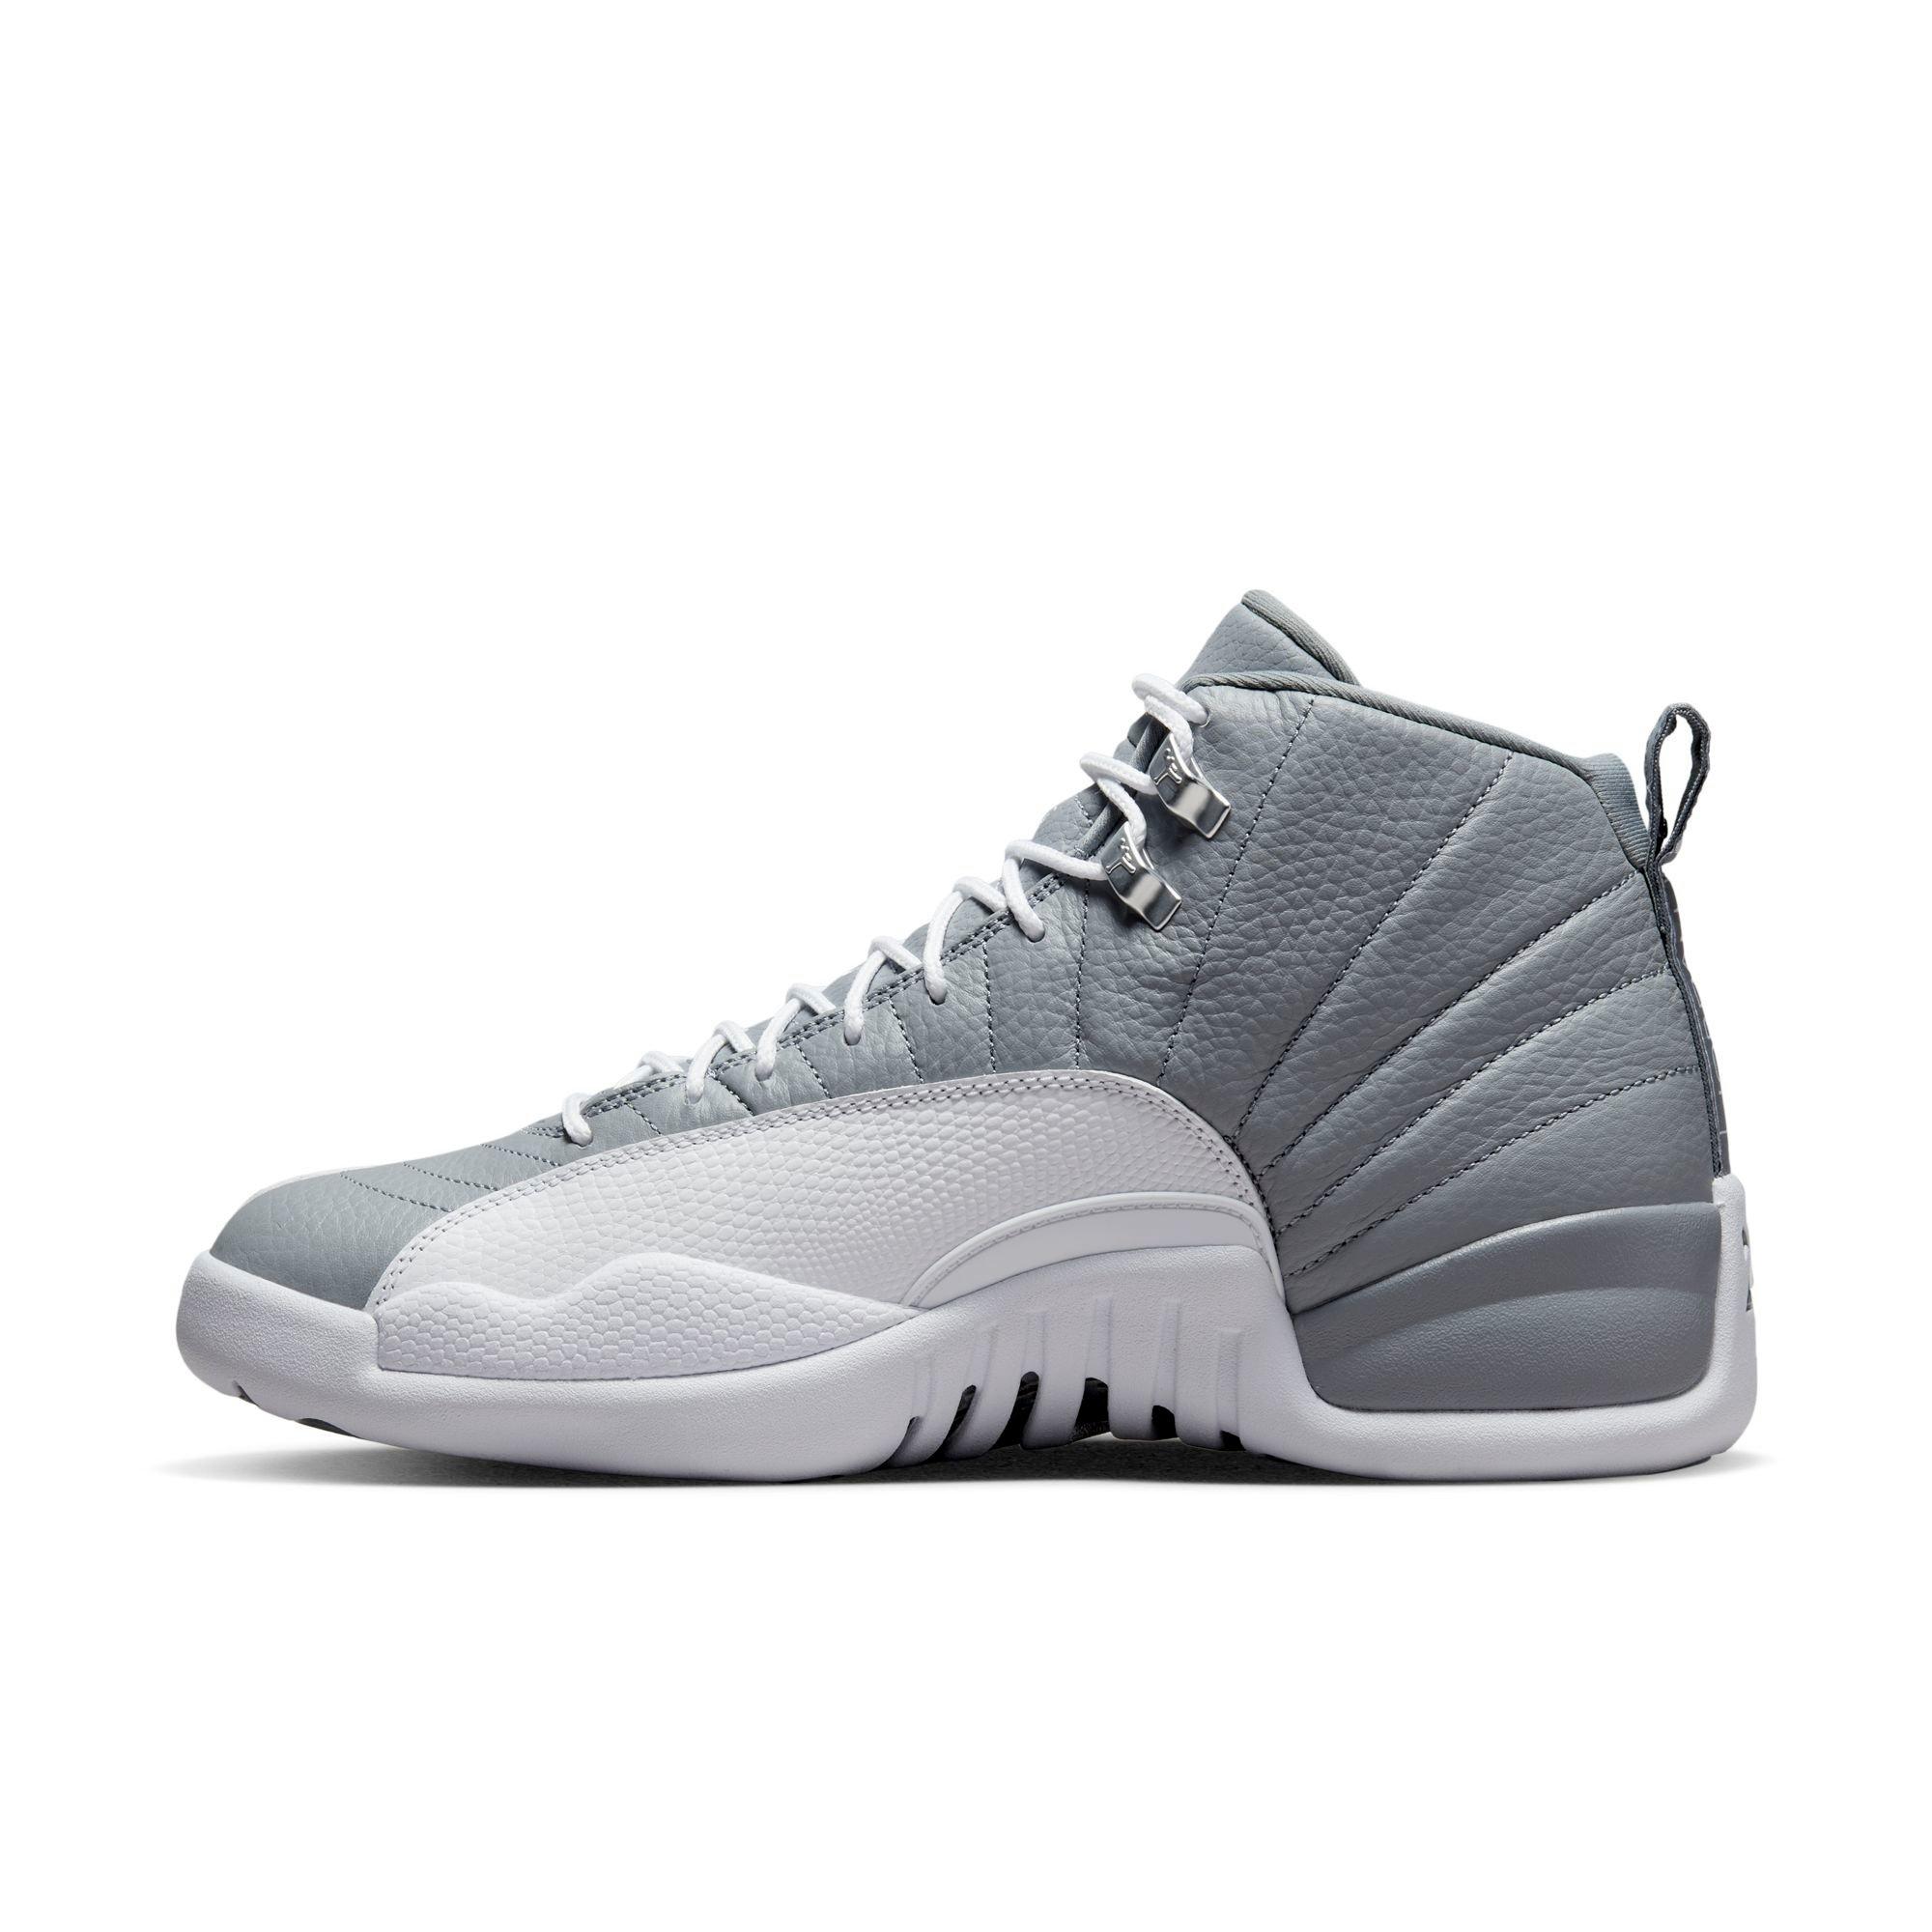 JORDAN 12 LOW WOLF GREY EARLY UP CLOSE ON FOOT REVIEW !! 